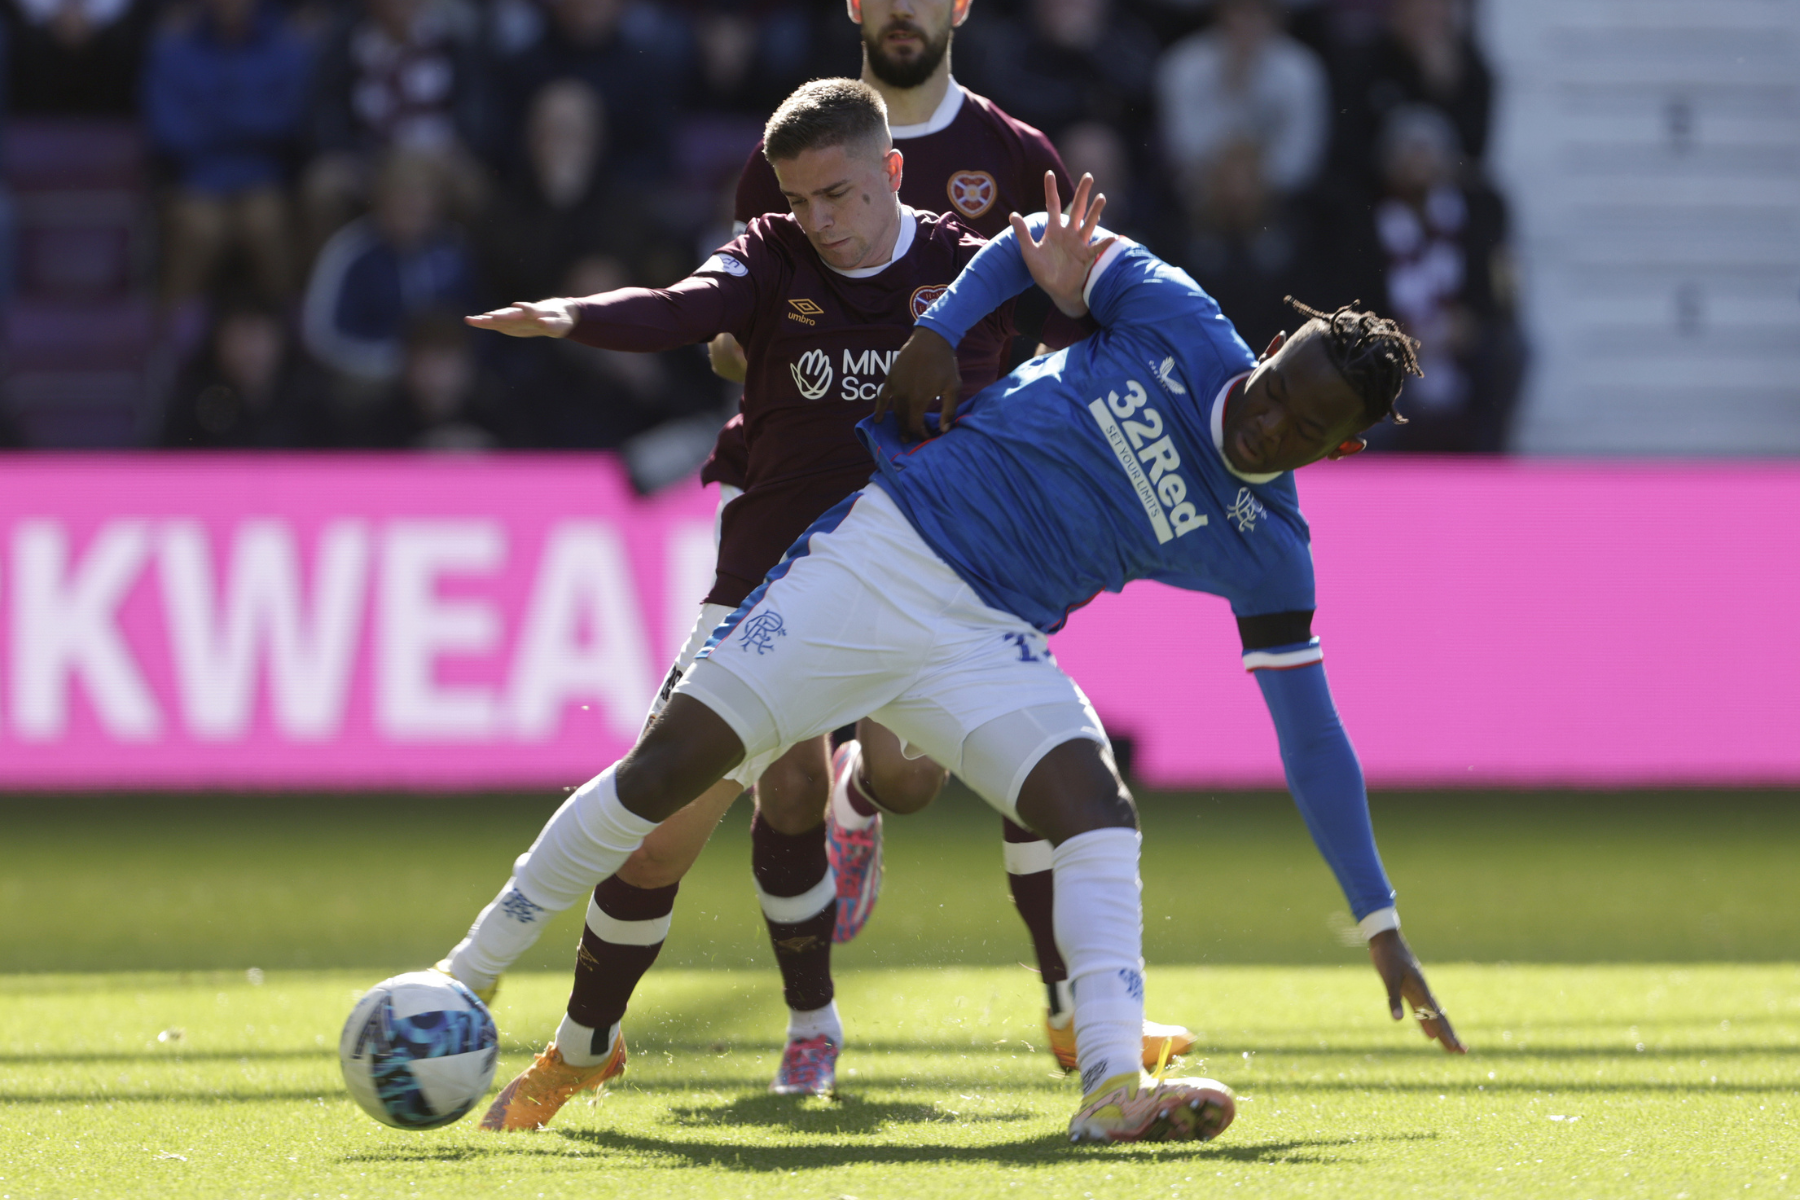 Hearts manager Robbie Neilson argues referee could have shown Cammy Devlin a yellow card for Rabbi Matondo foul